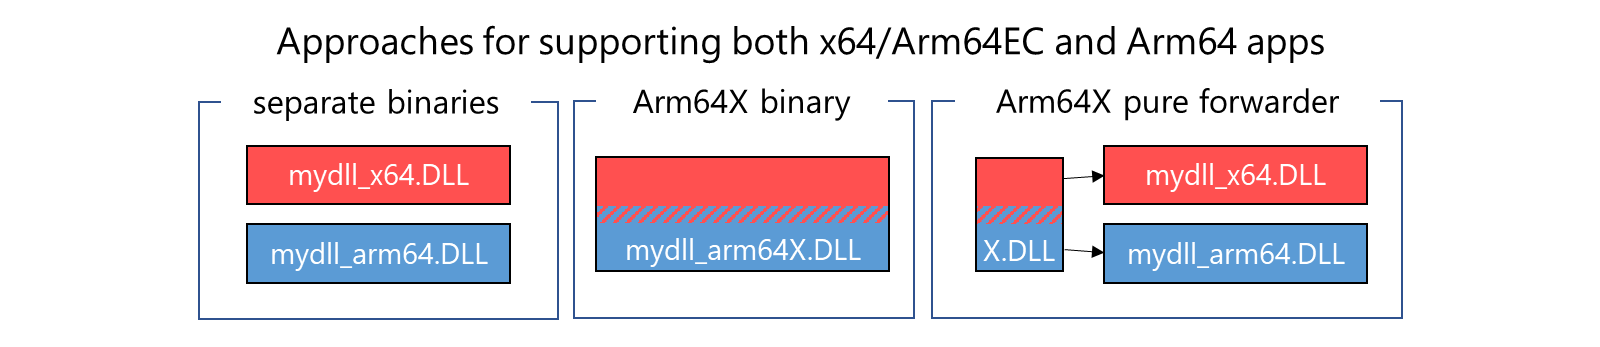 Three approaches for supporting apps separate binaries, Arm64x binary, Arm64X pure forwarder combining x64/Arm64EC with Arm64 binaries